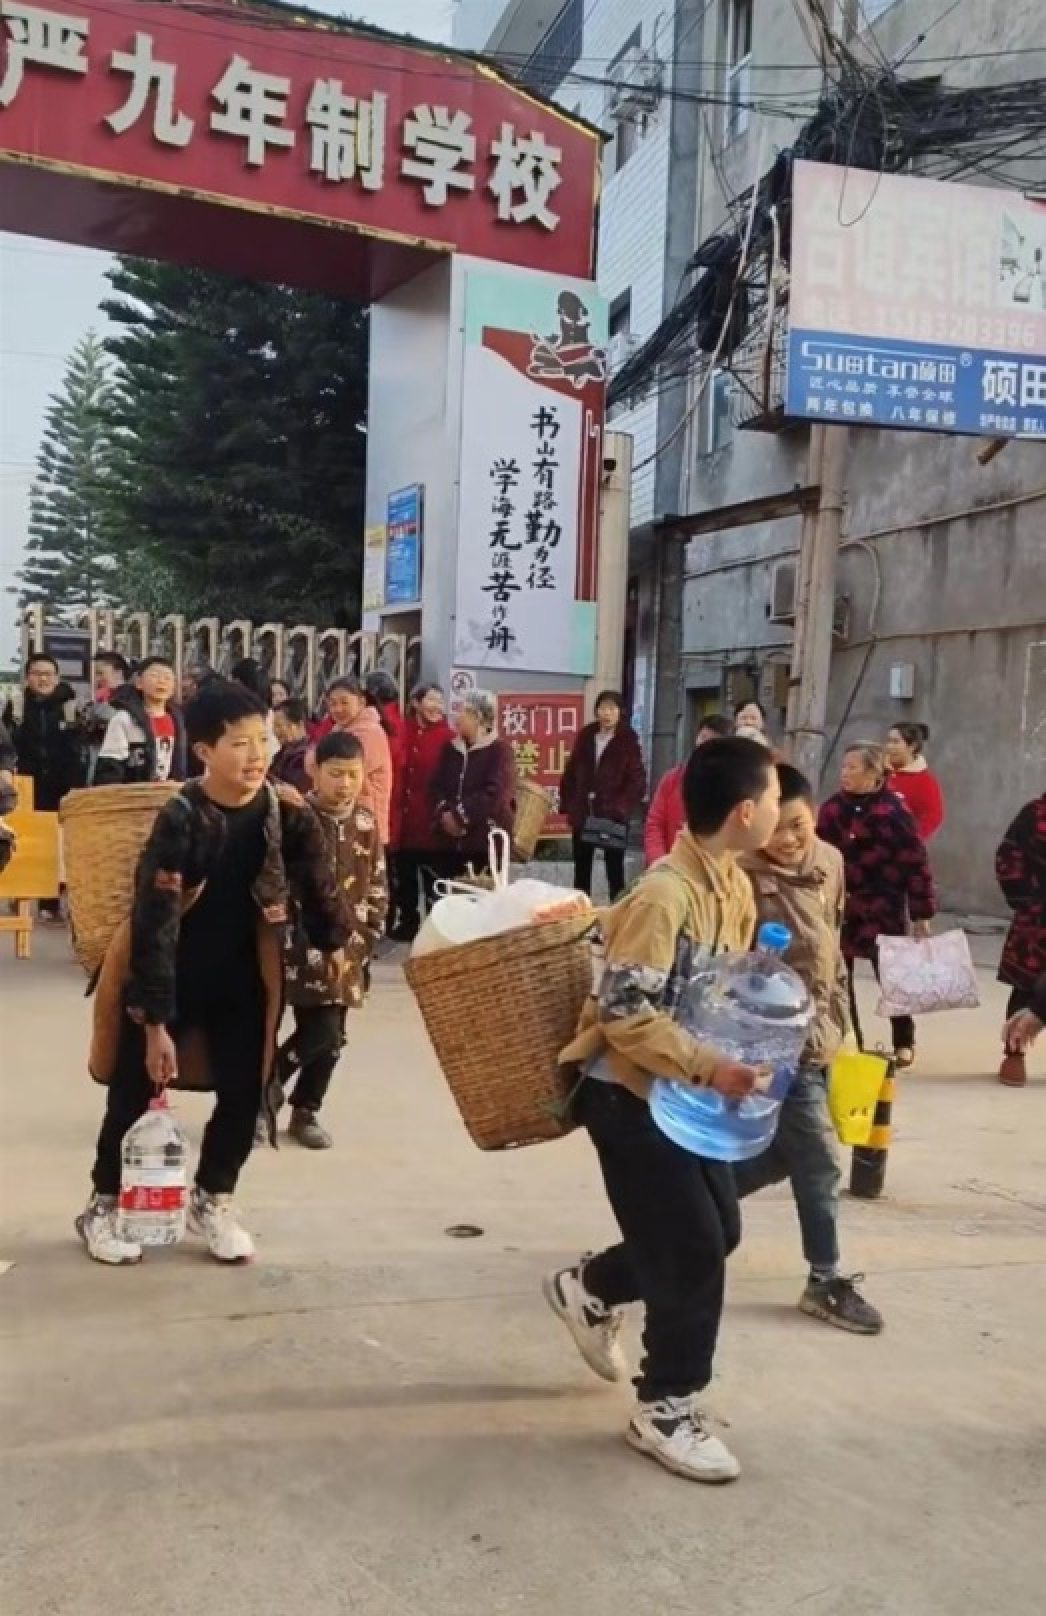 Students brought their ingredients and carried them with cooking utensils and firewood to the open field for the school excursion. Photo: Baidu